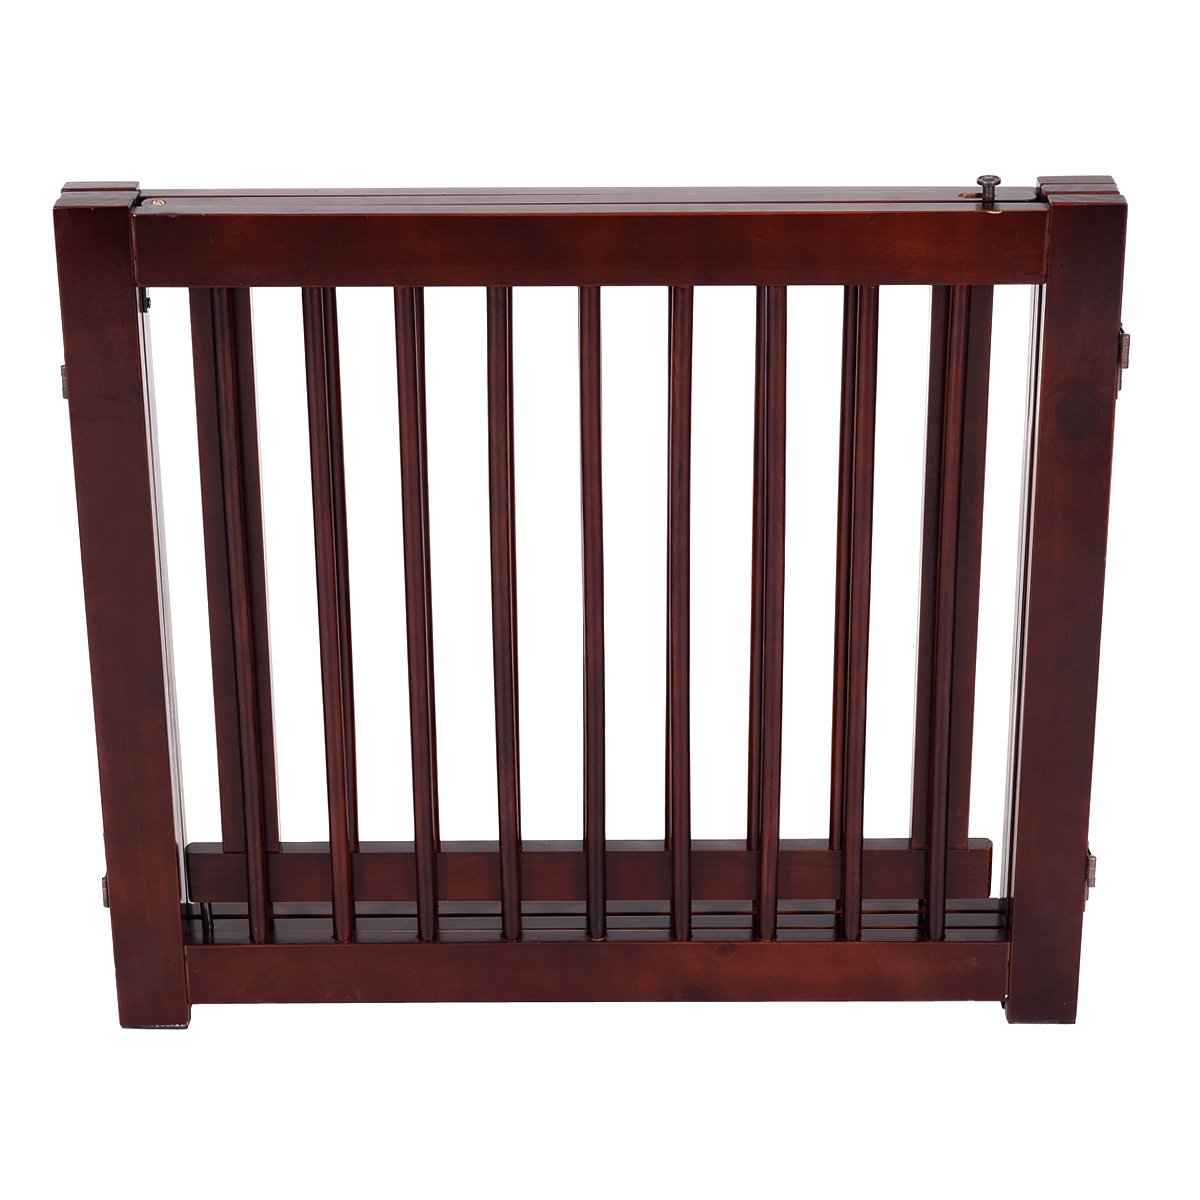 24 inch Configurable Dog Gate with Door